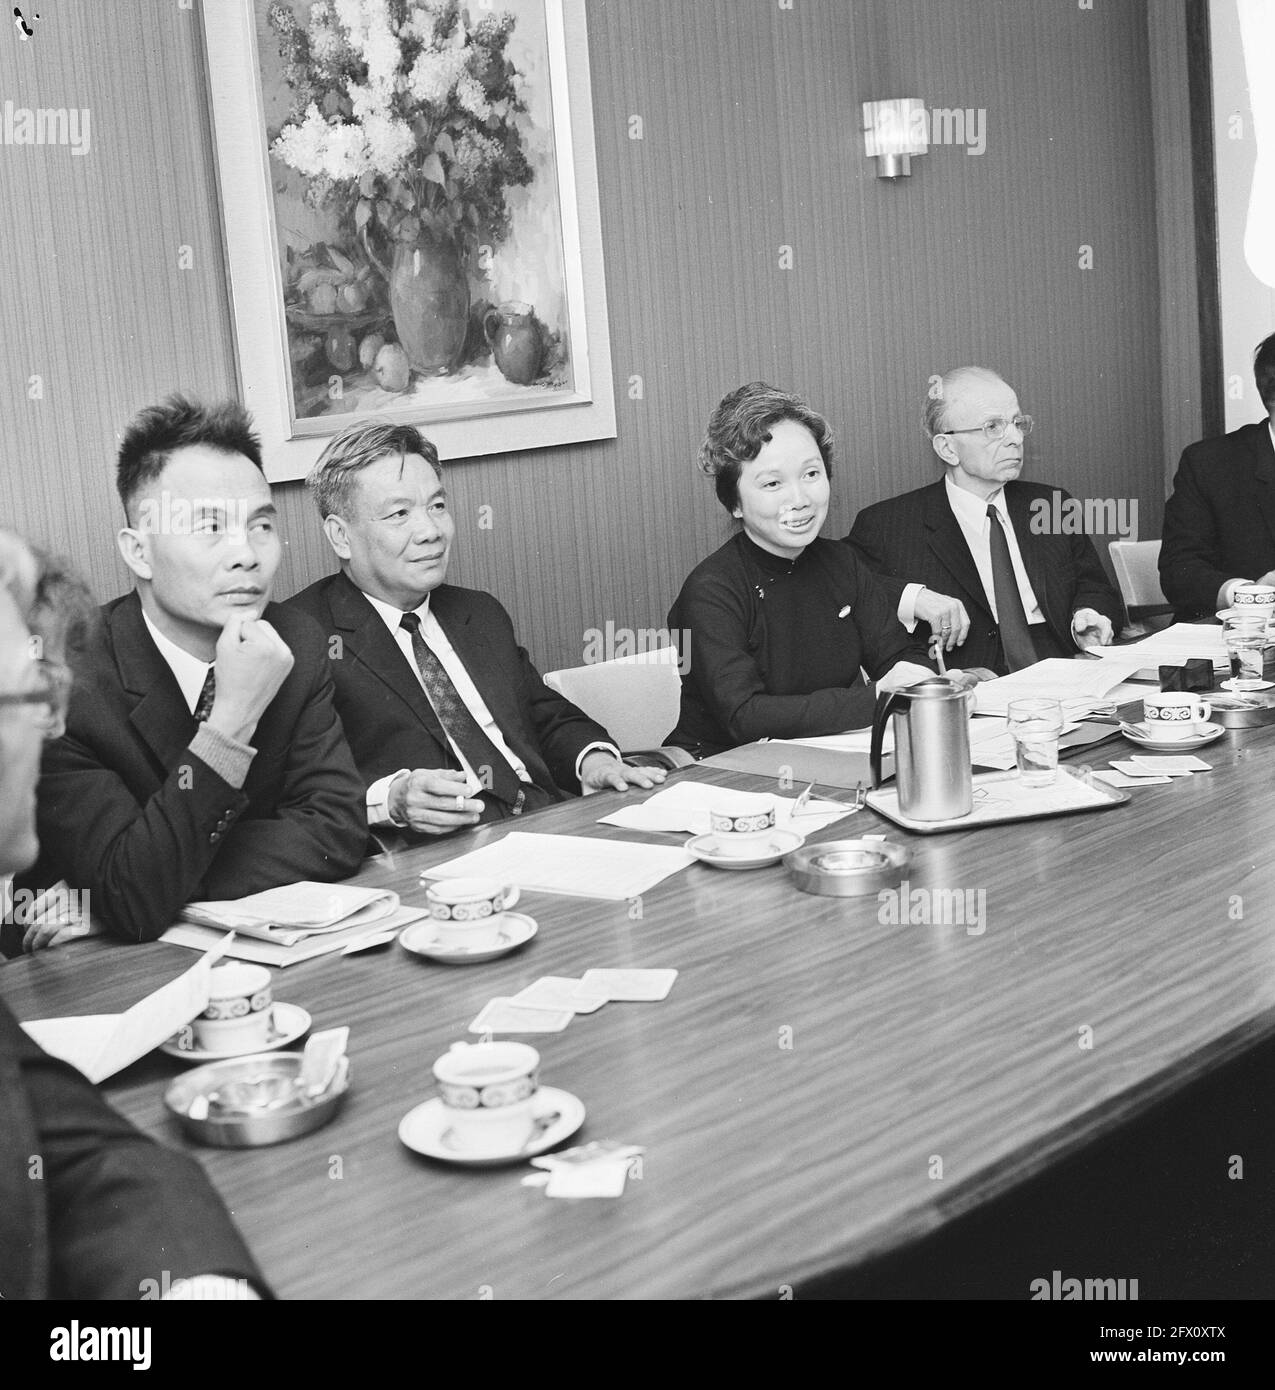 South Vietnamese minister during press conference in Amsterdam, Mr. Huynh van Nghi, husband of minister Dr. Tran Ngoc Dang Ms. Hoa, May 1, 1974, ministers, press conferences, The Netherlands, 20th century press agency photo, news to remember, documentary, historic photography 1945-1990, visual stories, human history of the Twentieth Century, capturing moments in time Stock Photo